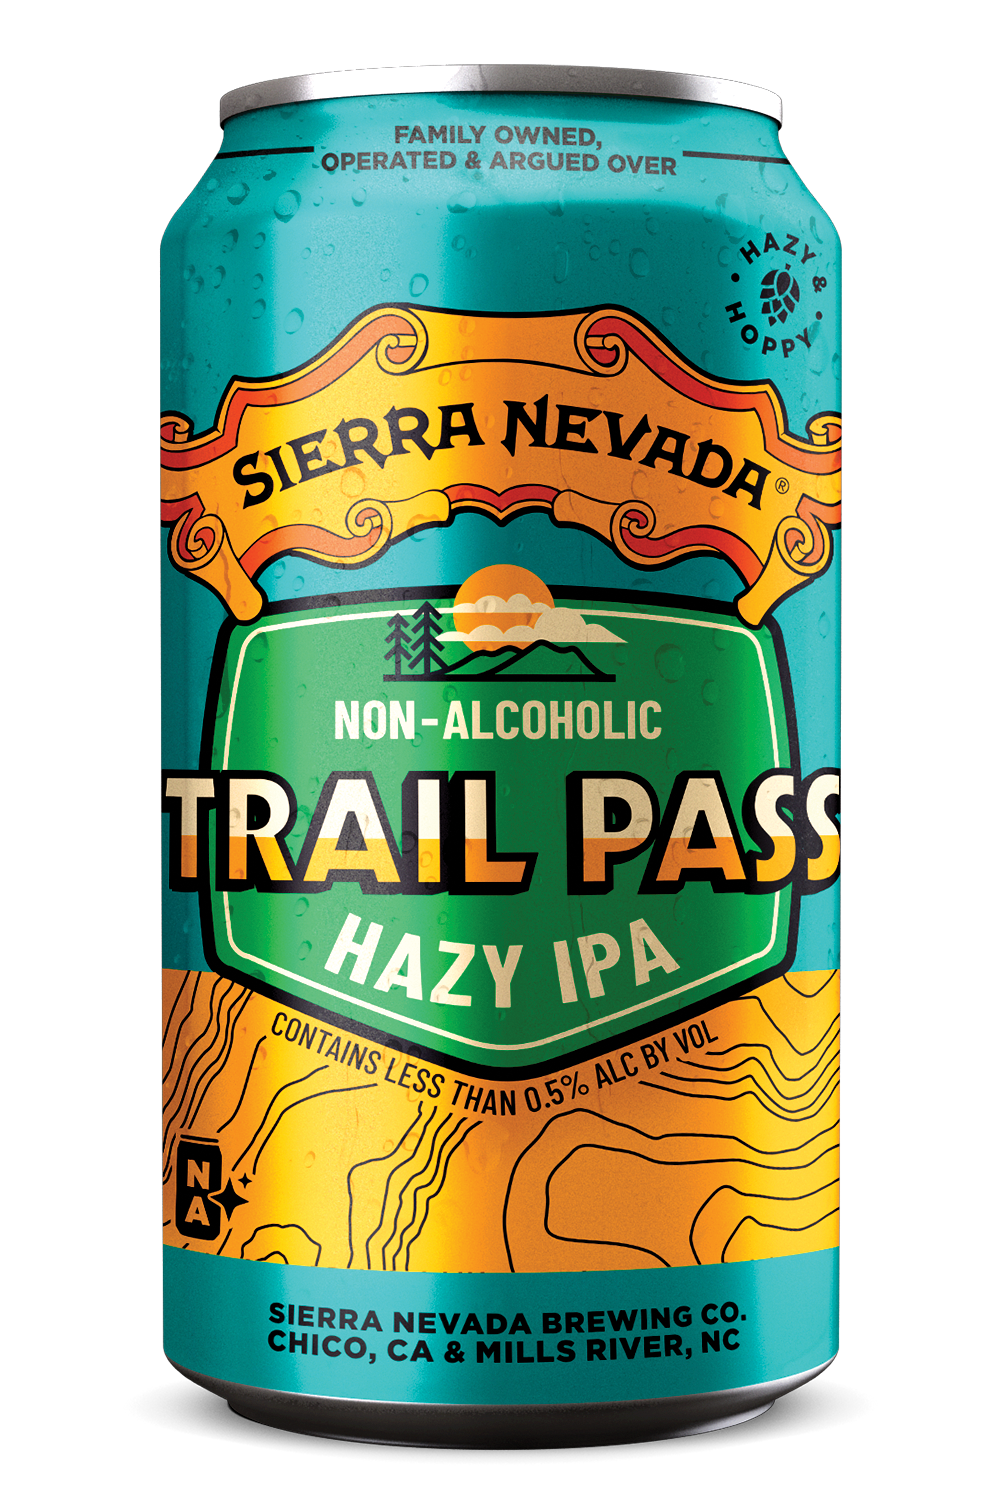 An individual can of Sierra Nevada non-alcoholic Trail Pass Hazy IPA brew